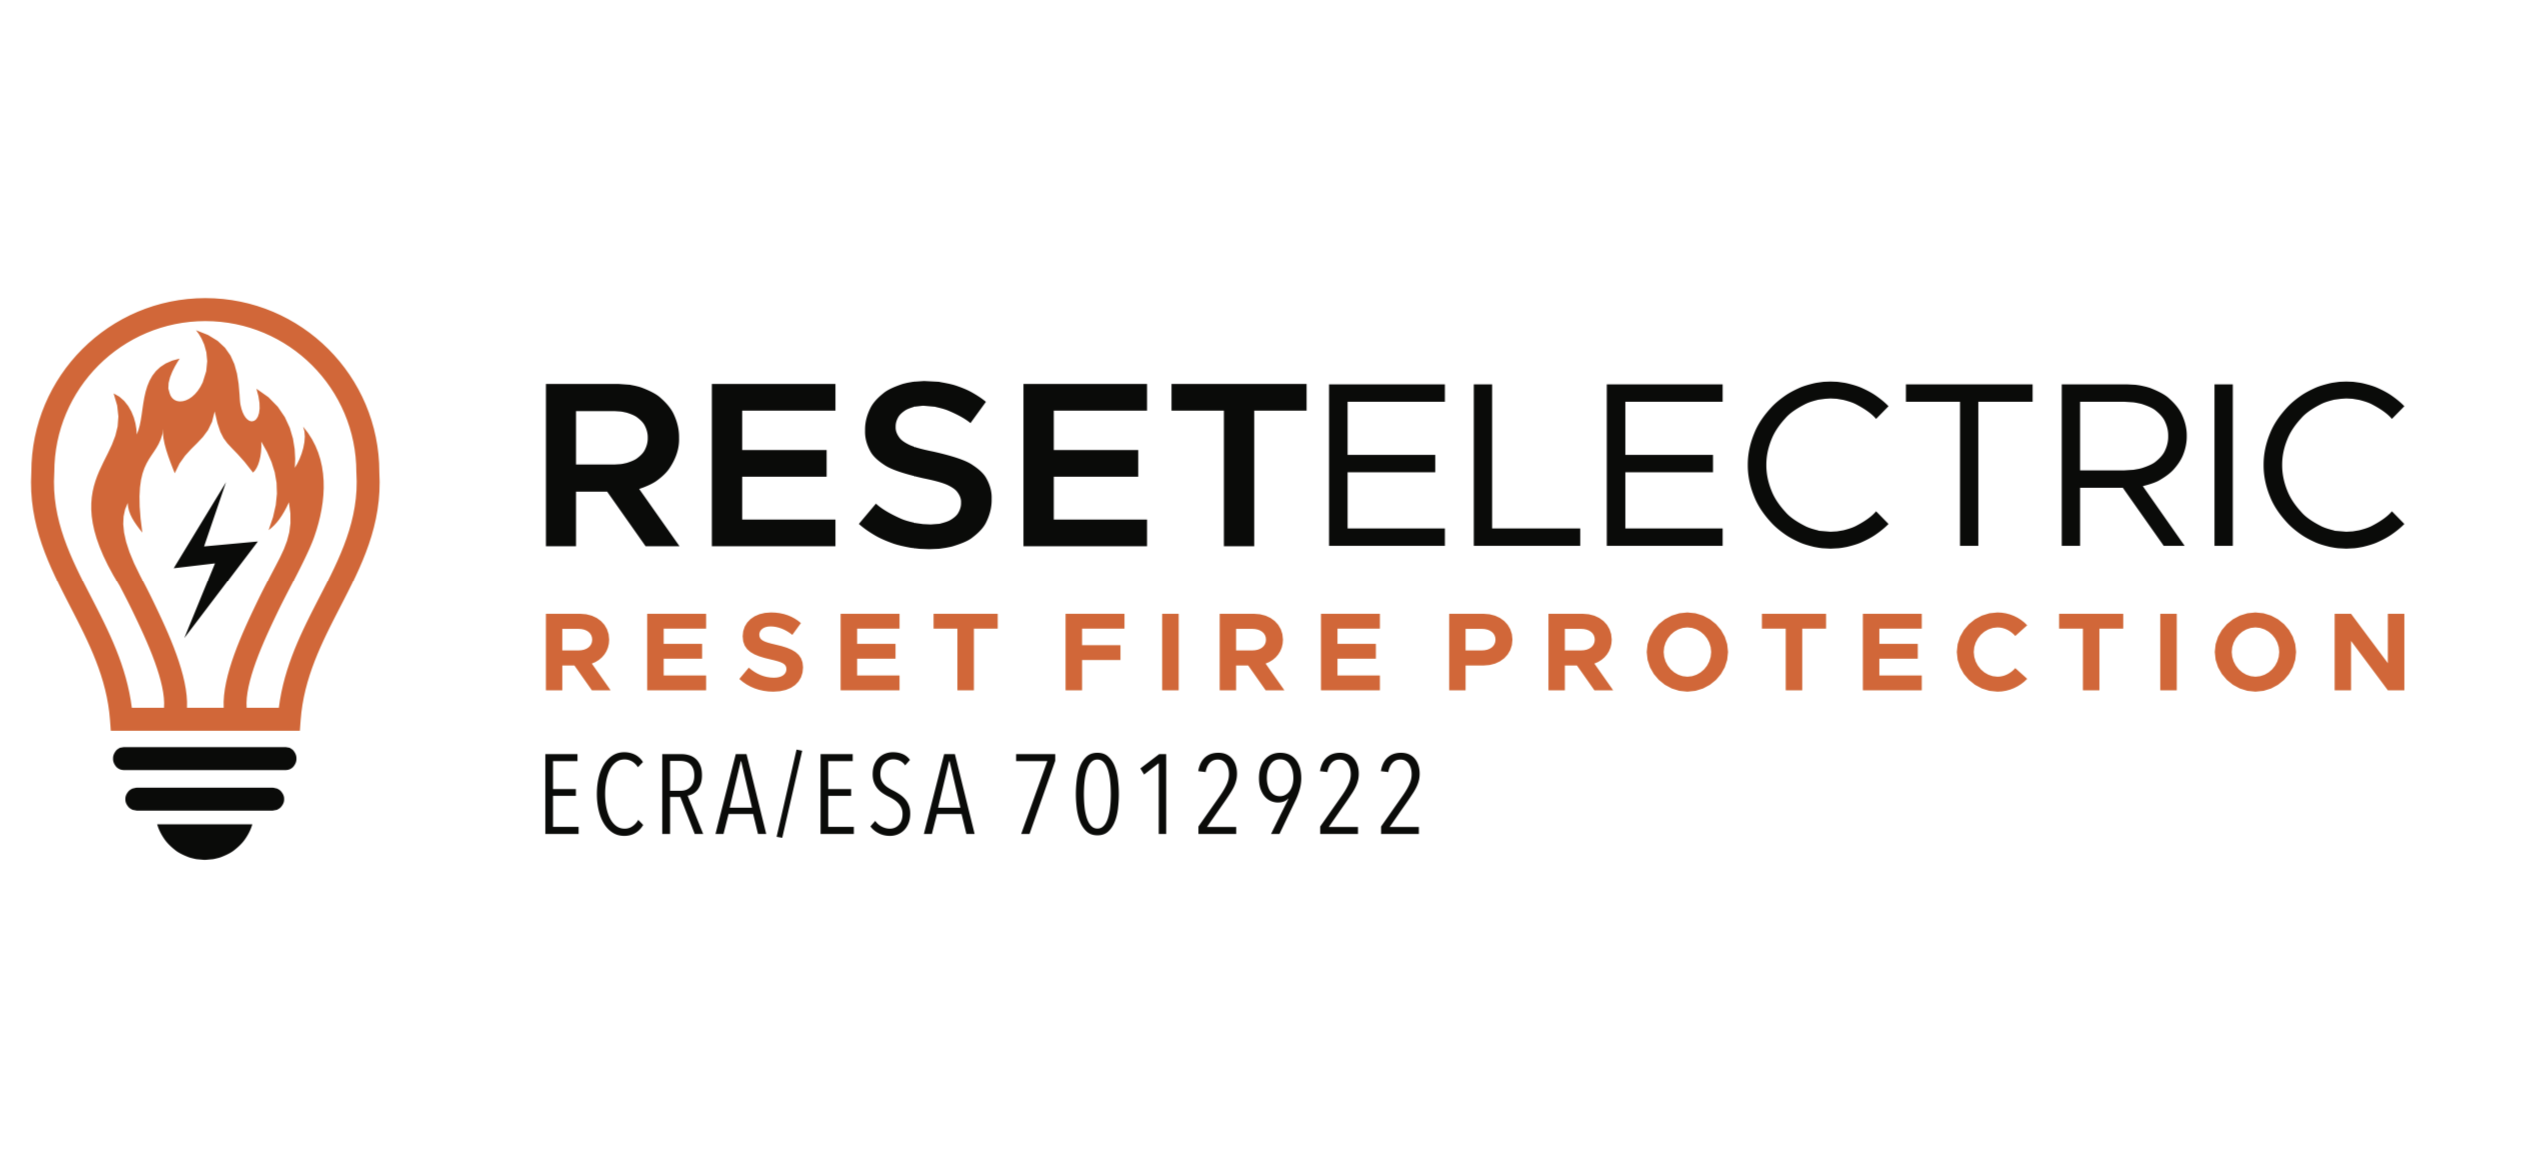 Resetelectric Reset Fire Protection